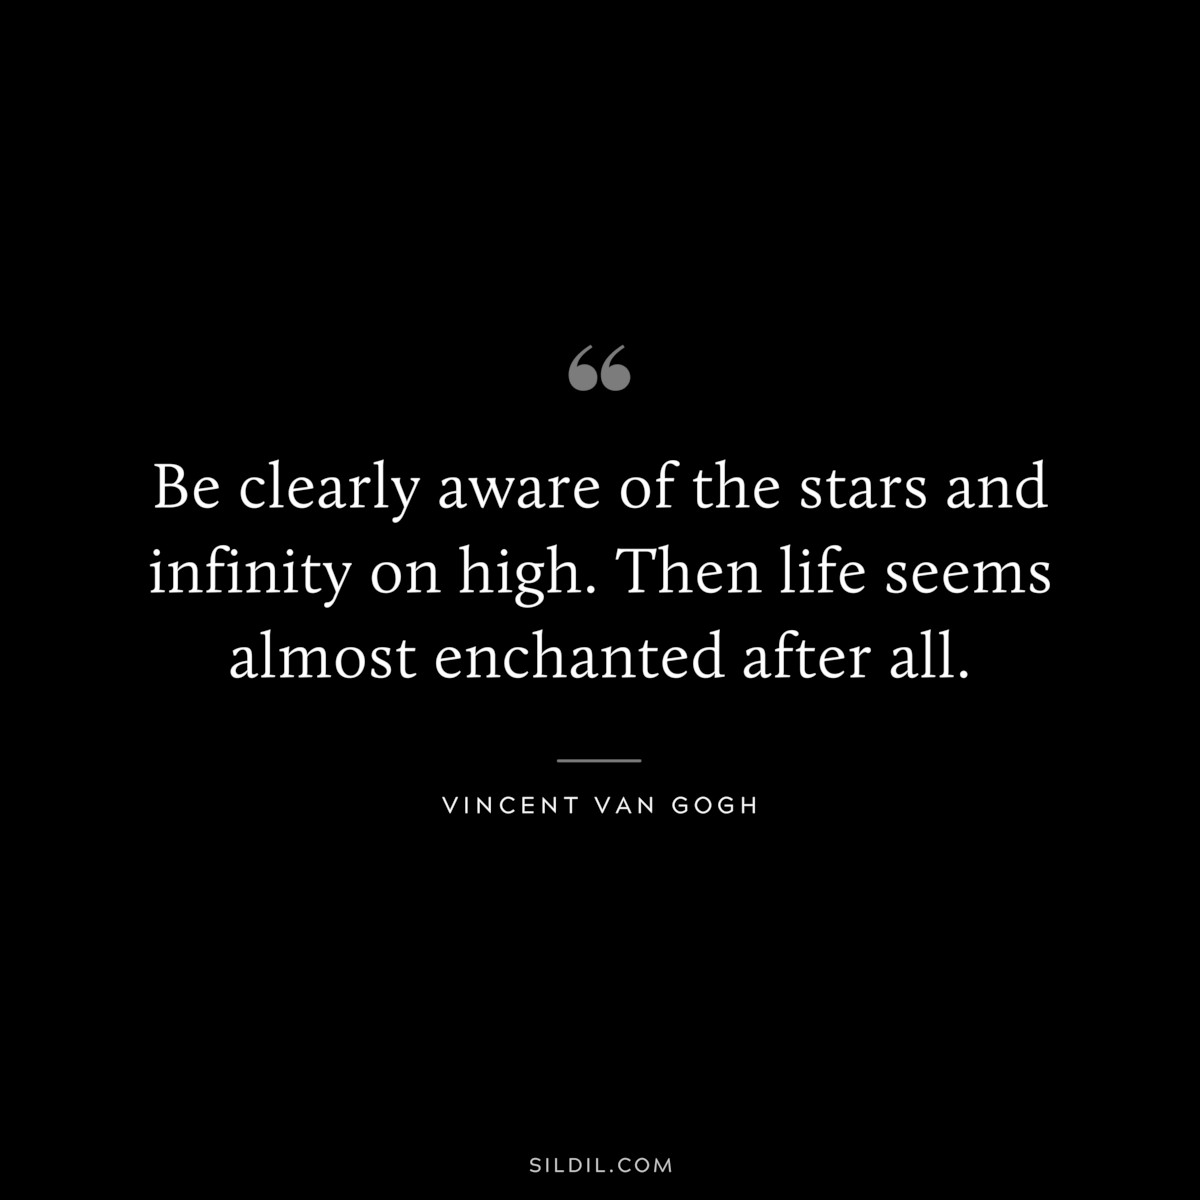 Be clearly aware of the stars and infinity on high. Then life seems almost enchanted after all. ― Vincent van Gogh